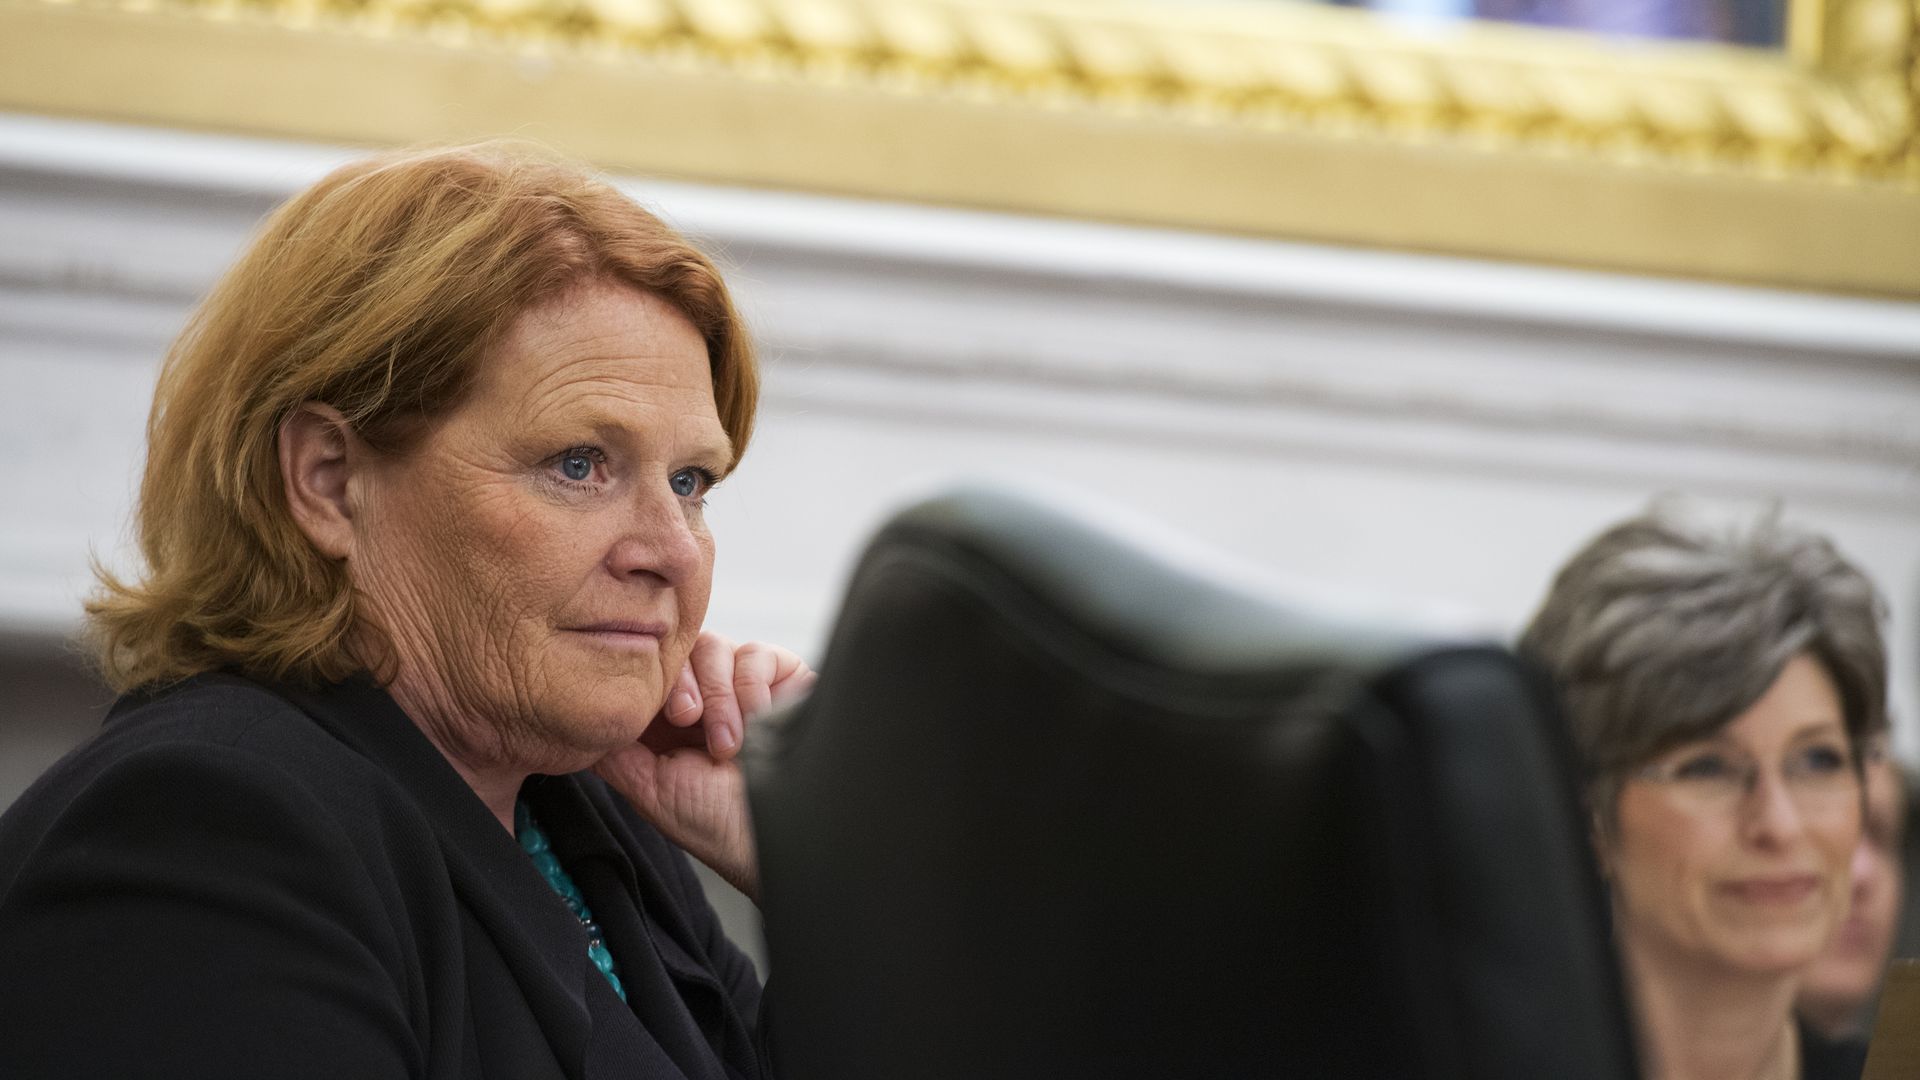 Heidi Heitkamp looking at someone with her hand on her cheek